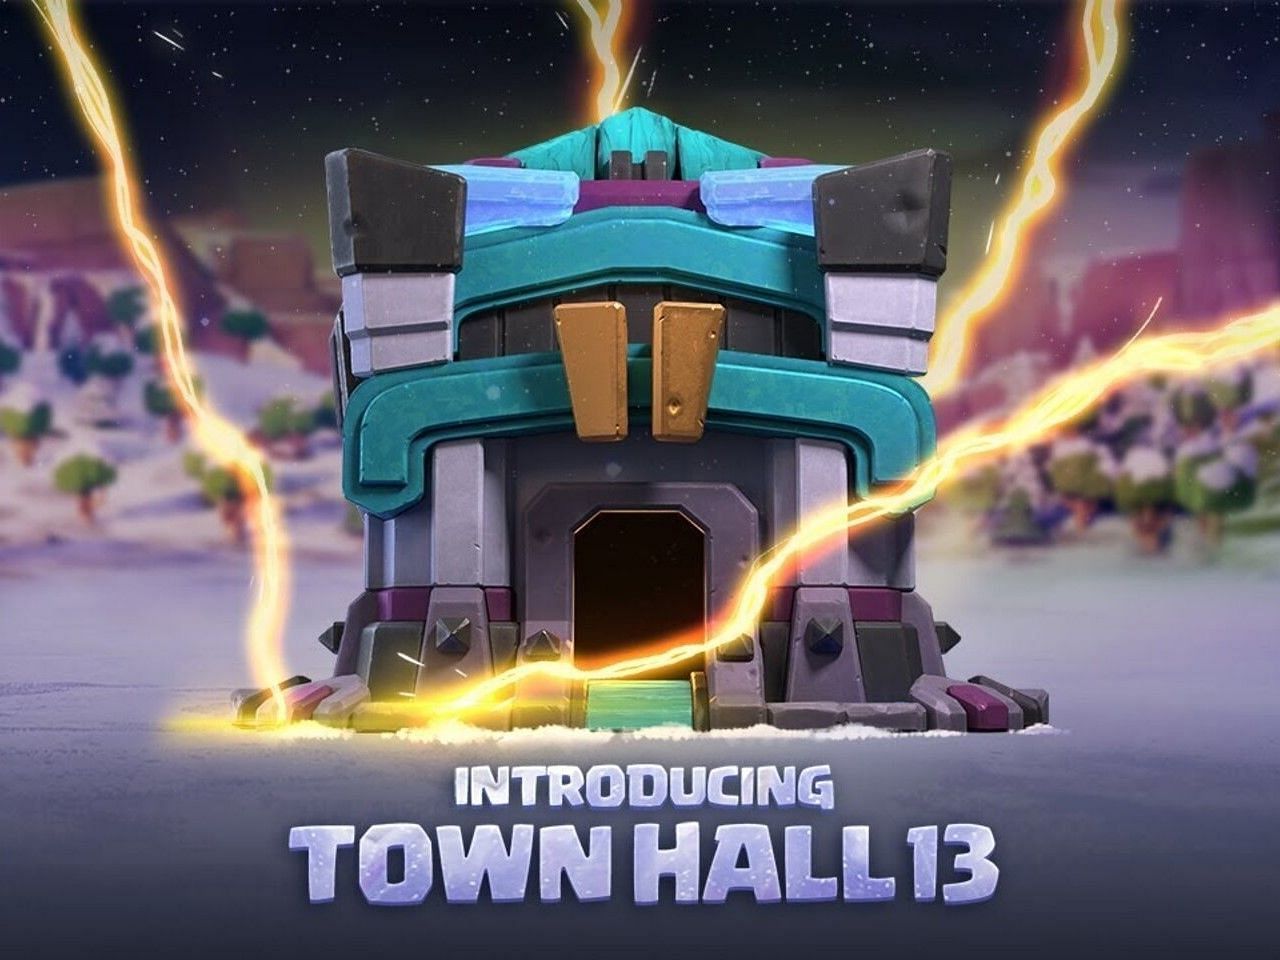 Town Hall 13 (Image via Supercell)